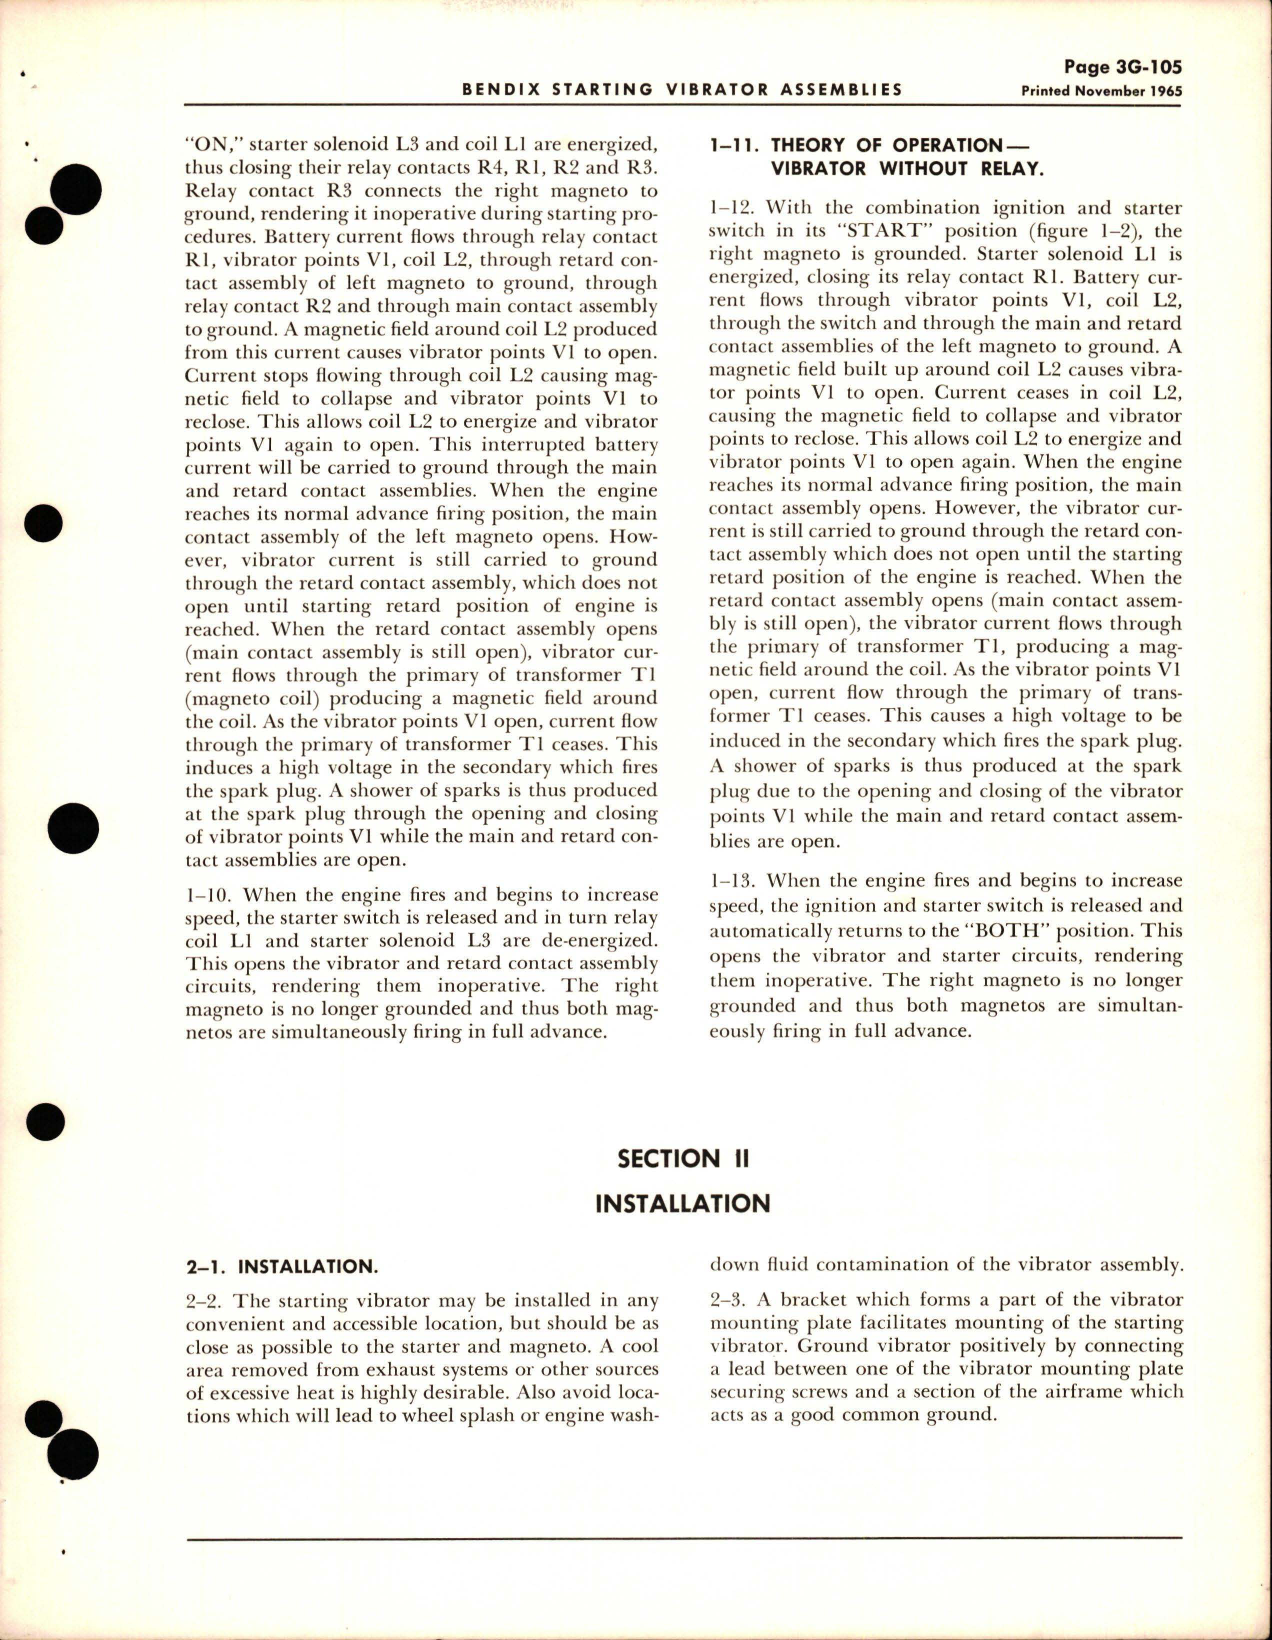 Sample page 5 from AirCorps Library document: Overhaul Instructions for Starting Vibrator Assembly - 10-176485 and 10-176487 Series